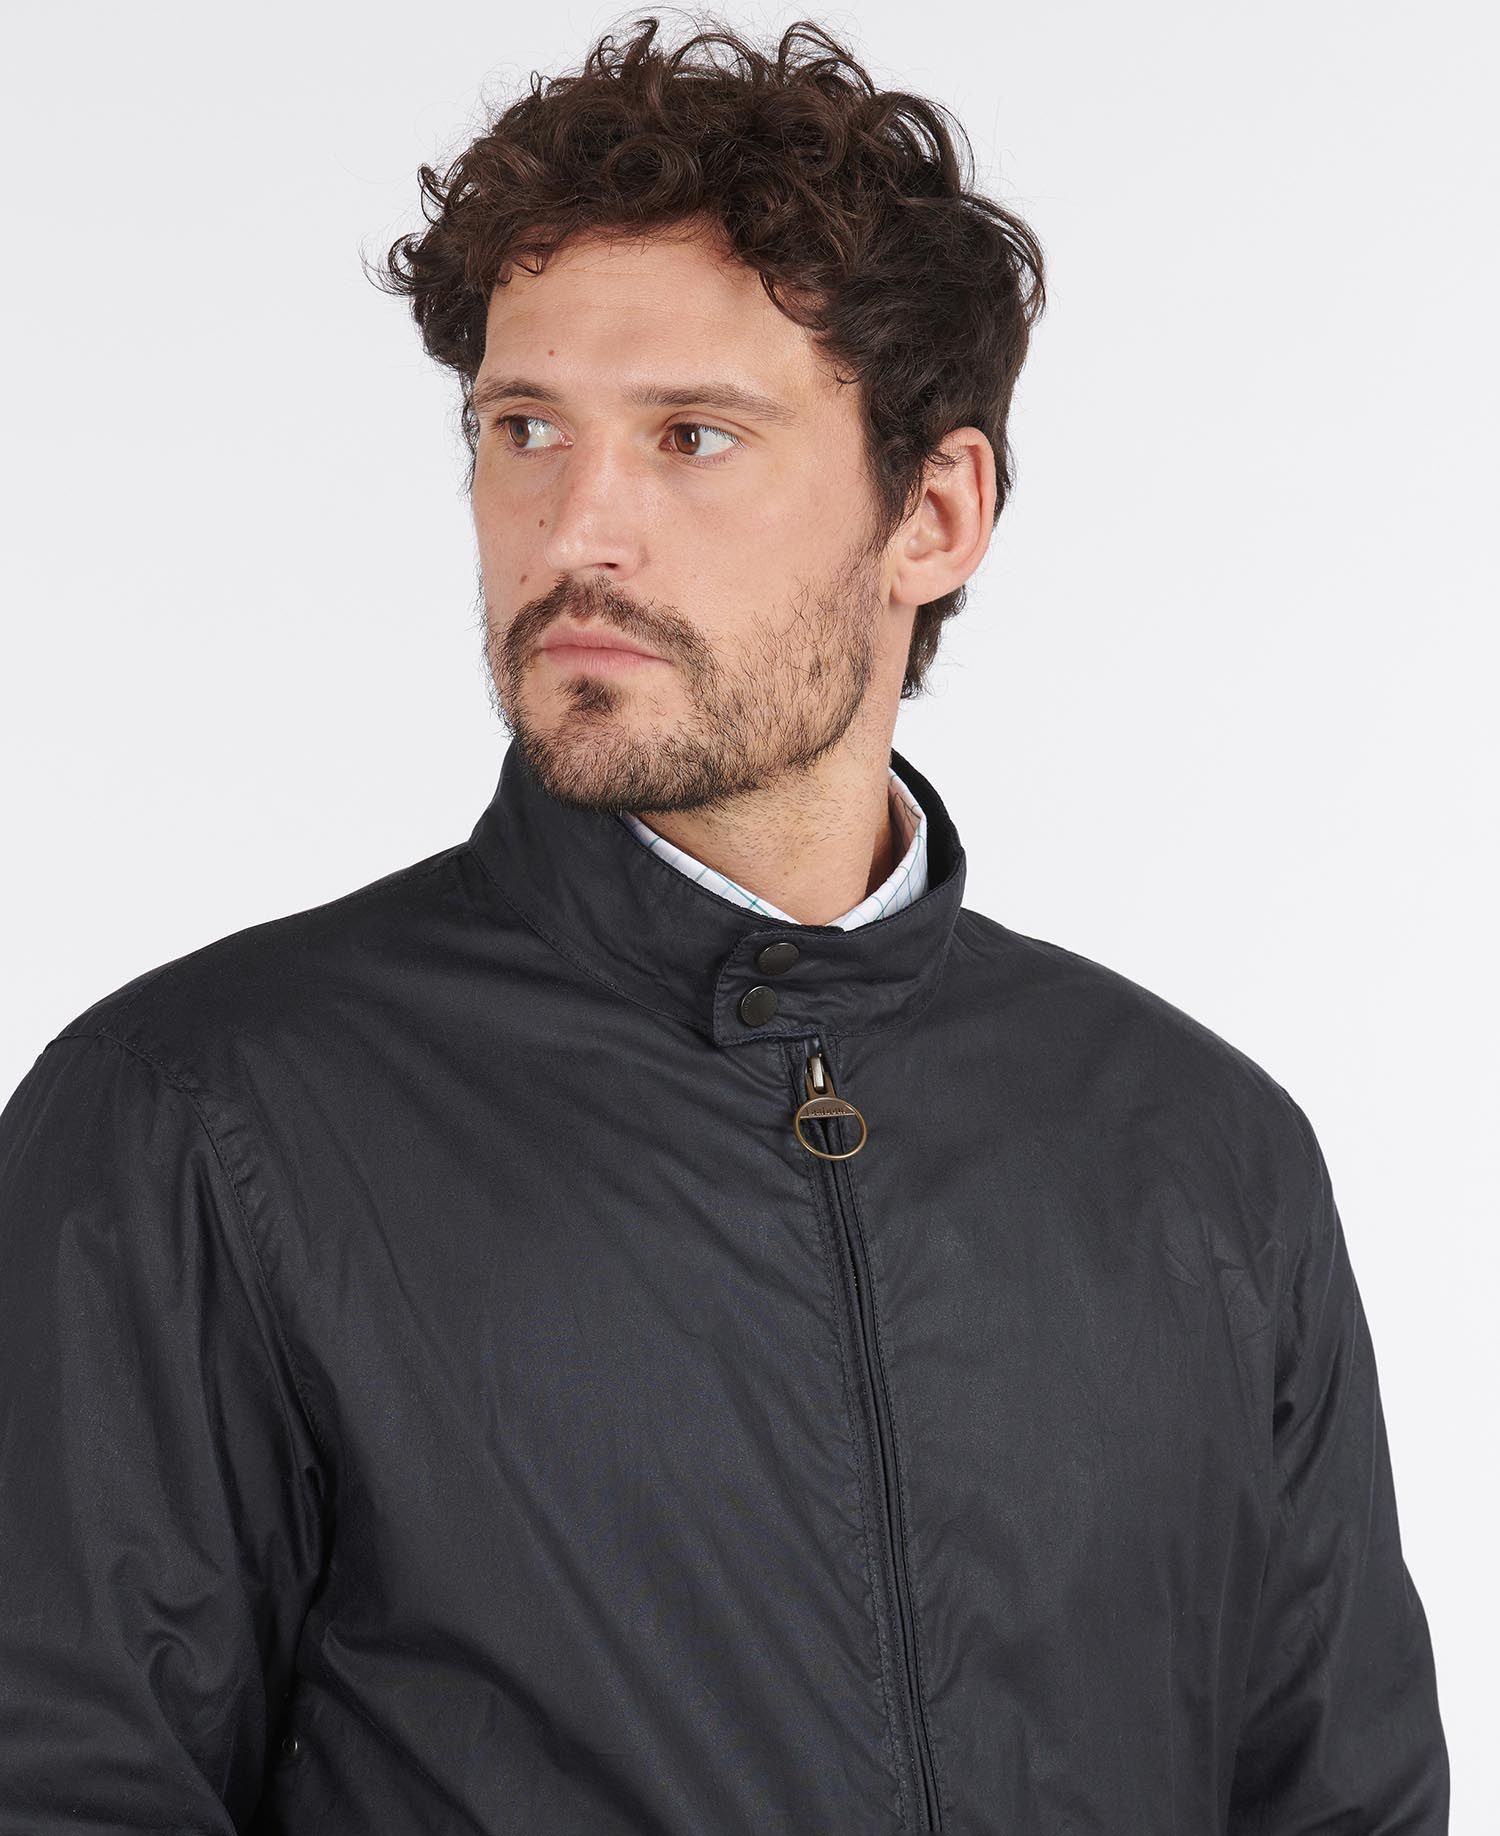 Barbour Lightweight Royston Waxed Cotton Jacket in Navy | Barbour